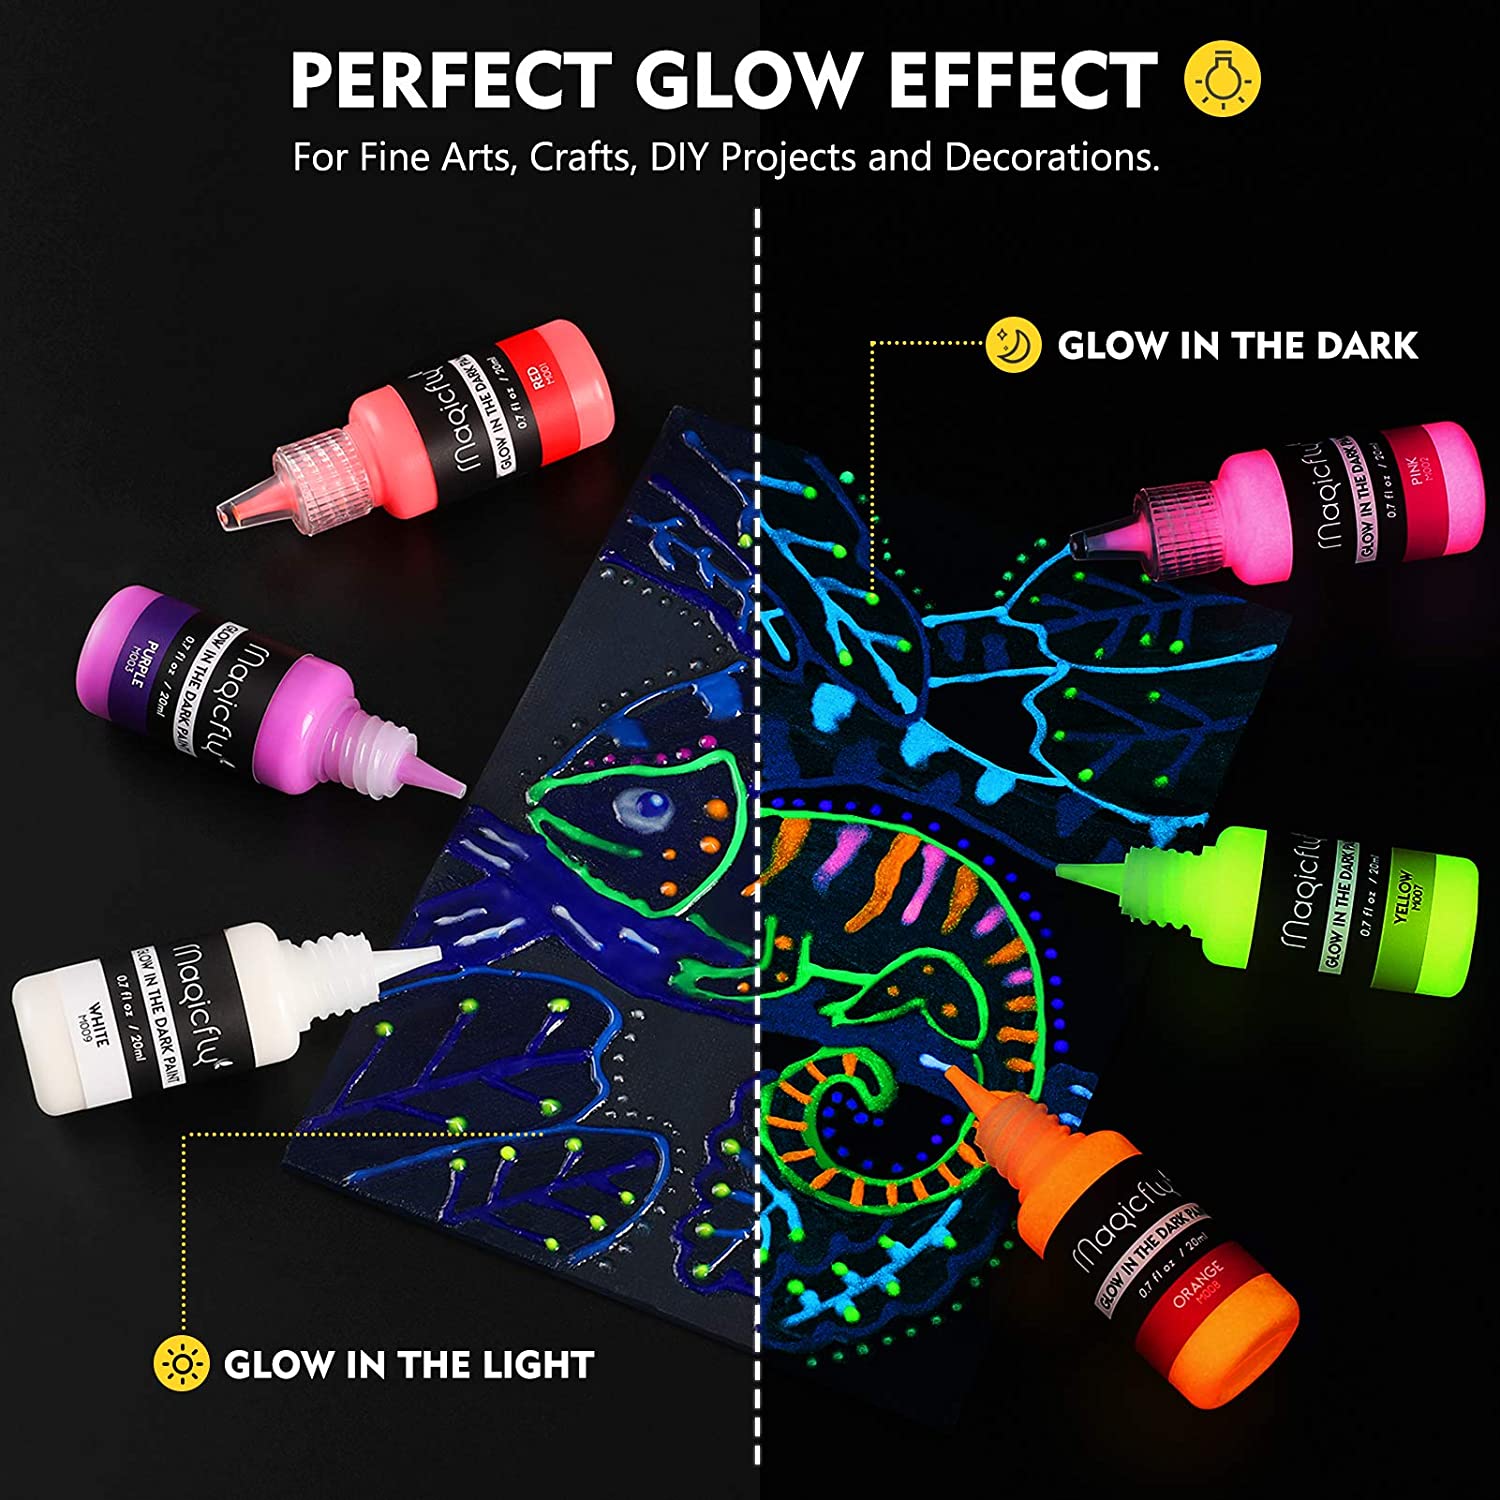 Glow in the Dark Paint - Set of 8, 20 Ml Acrylic Paints for Outdoor